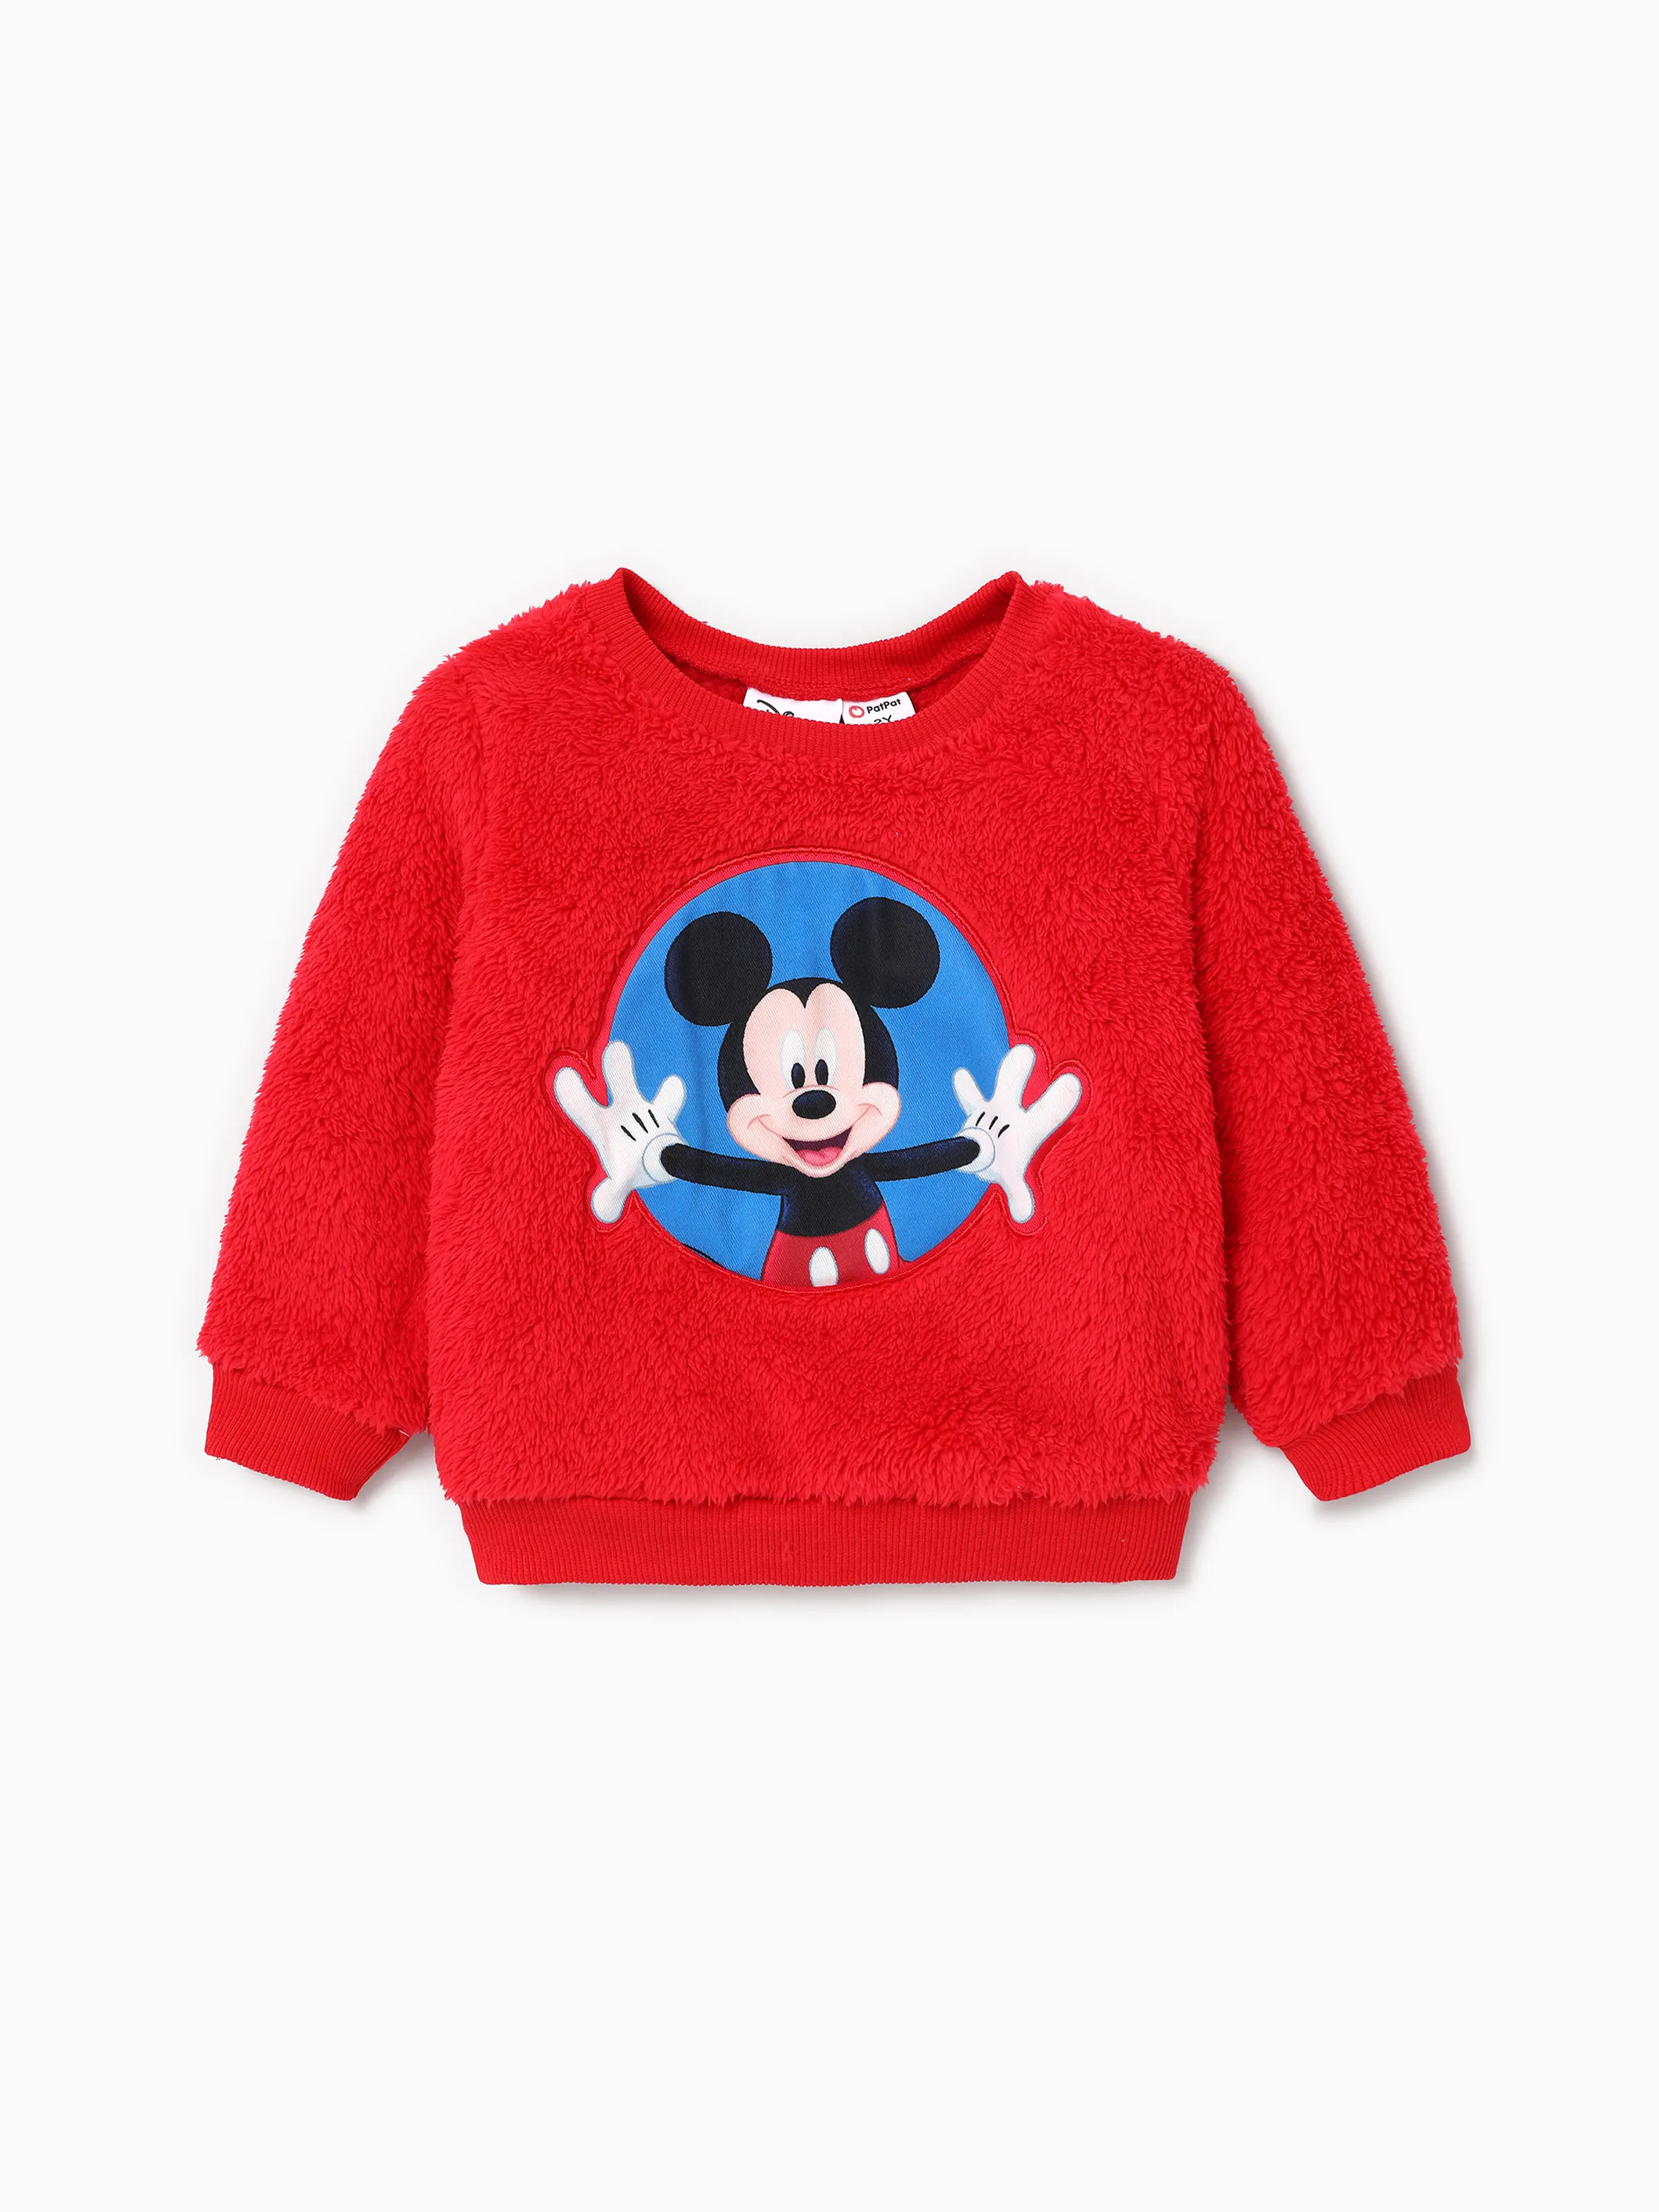 

Disney Mickey and Friends Toddler Girl/Boy Character Embroidered Long-sleeve Fluffy Sweatshirt